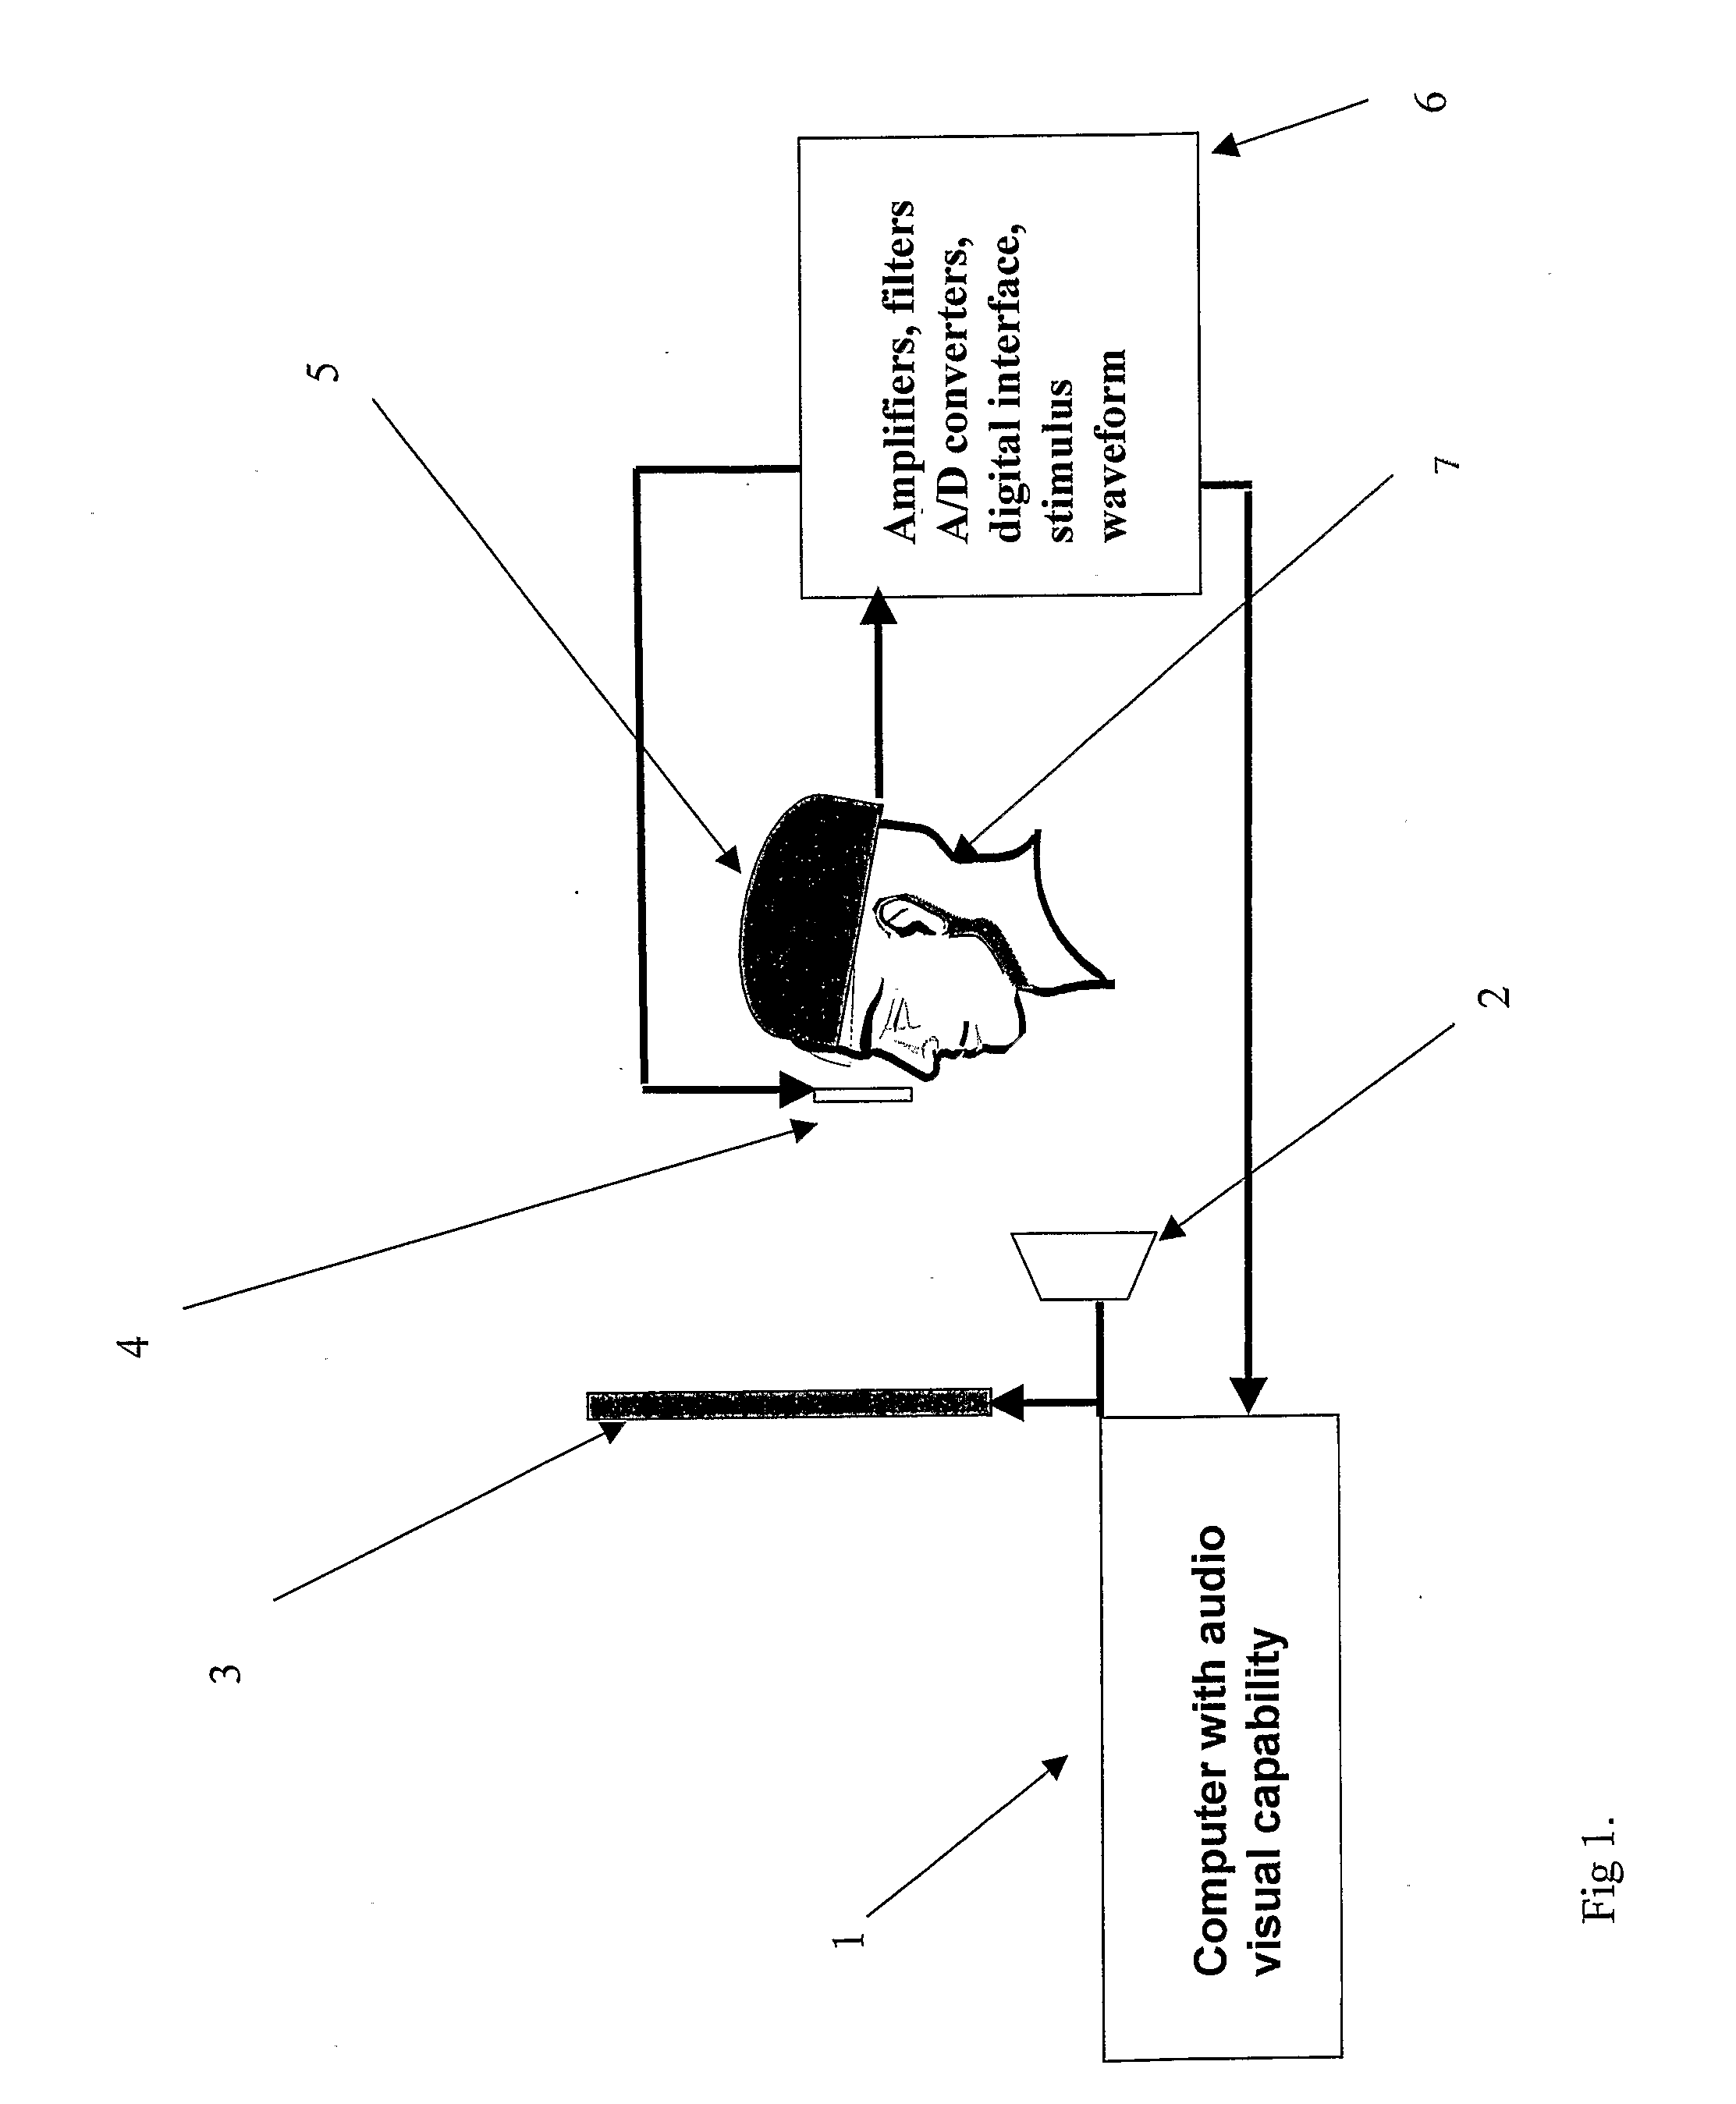 Method for evaluating the effectiveness of commercial communication